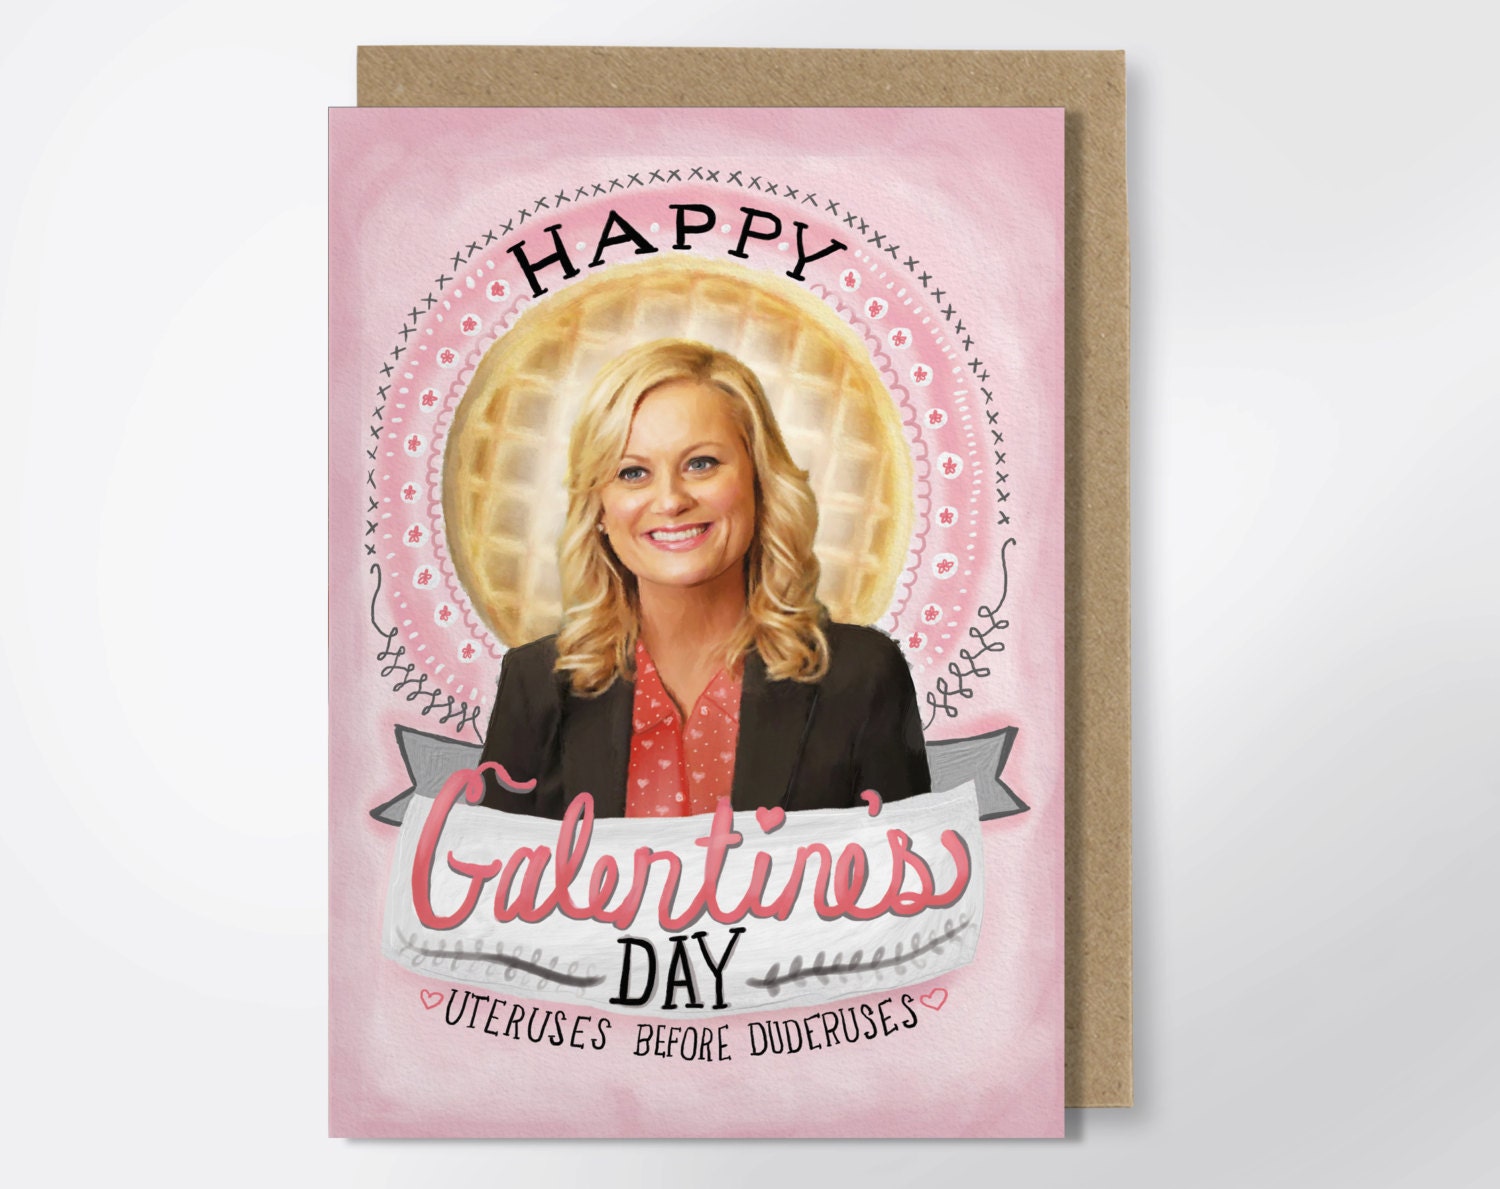 Happy Galentine's Day Leslie Knope Greeting Card